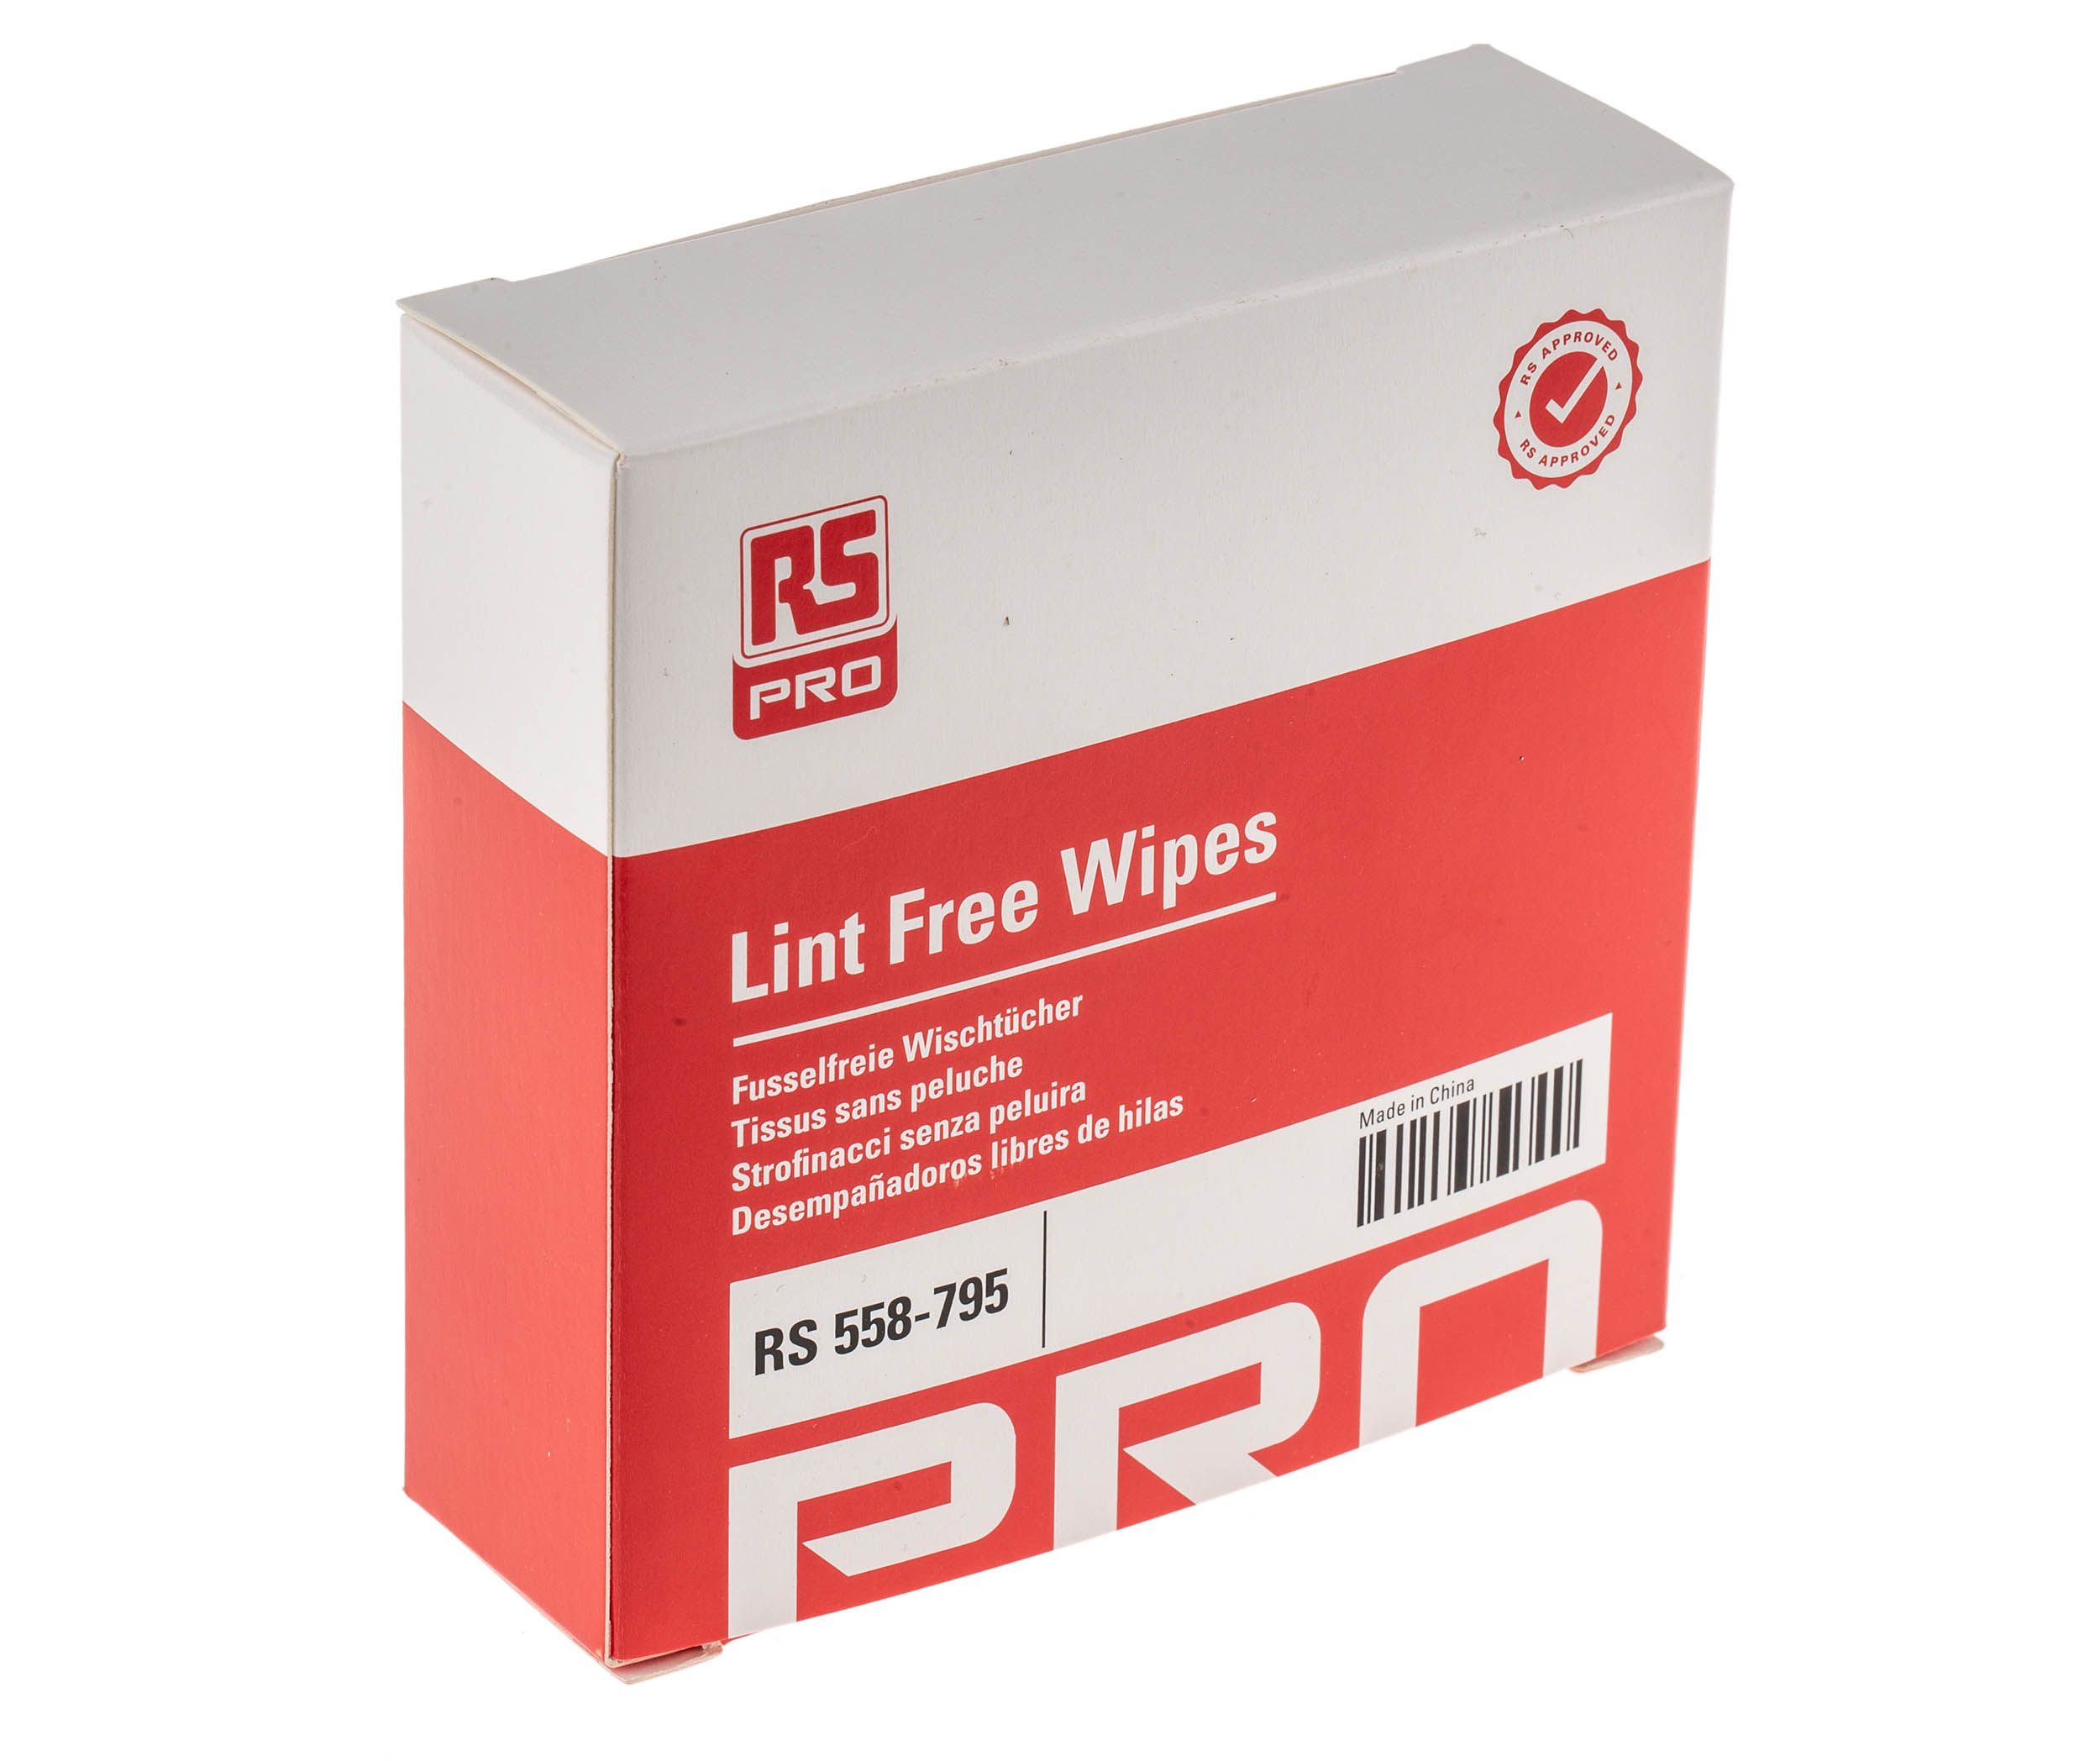 RS PRO Dry Multi-Purpose Wipes for Computer Screens, Office Equipment, Plastic, Screen Filters Use, Box of 100